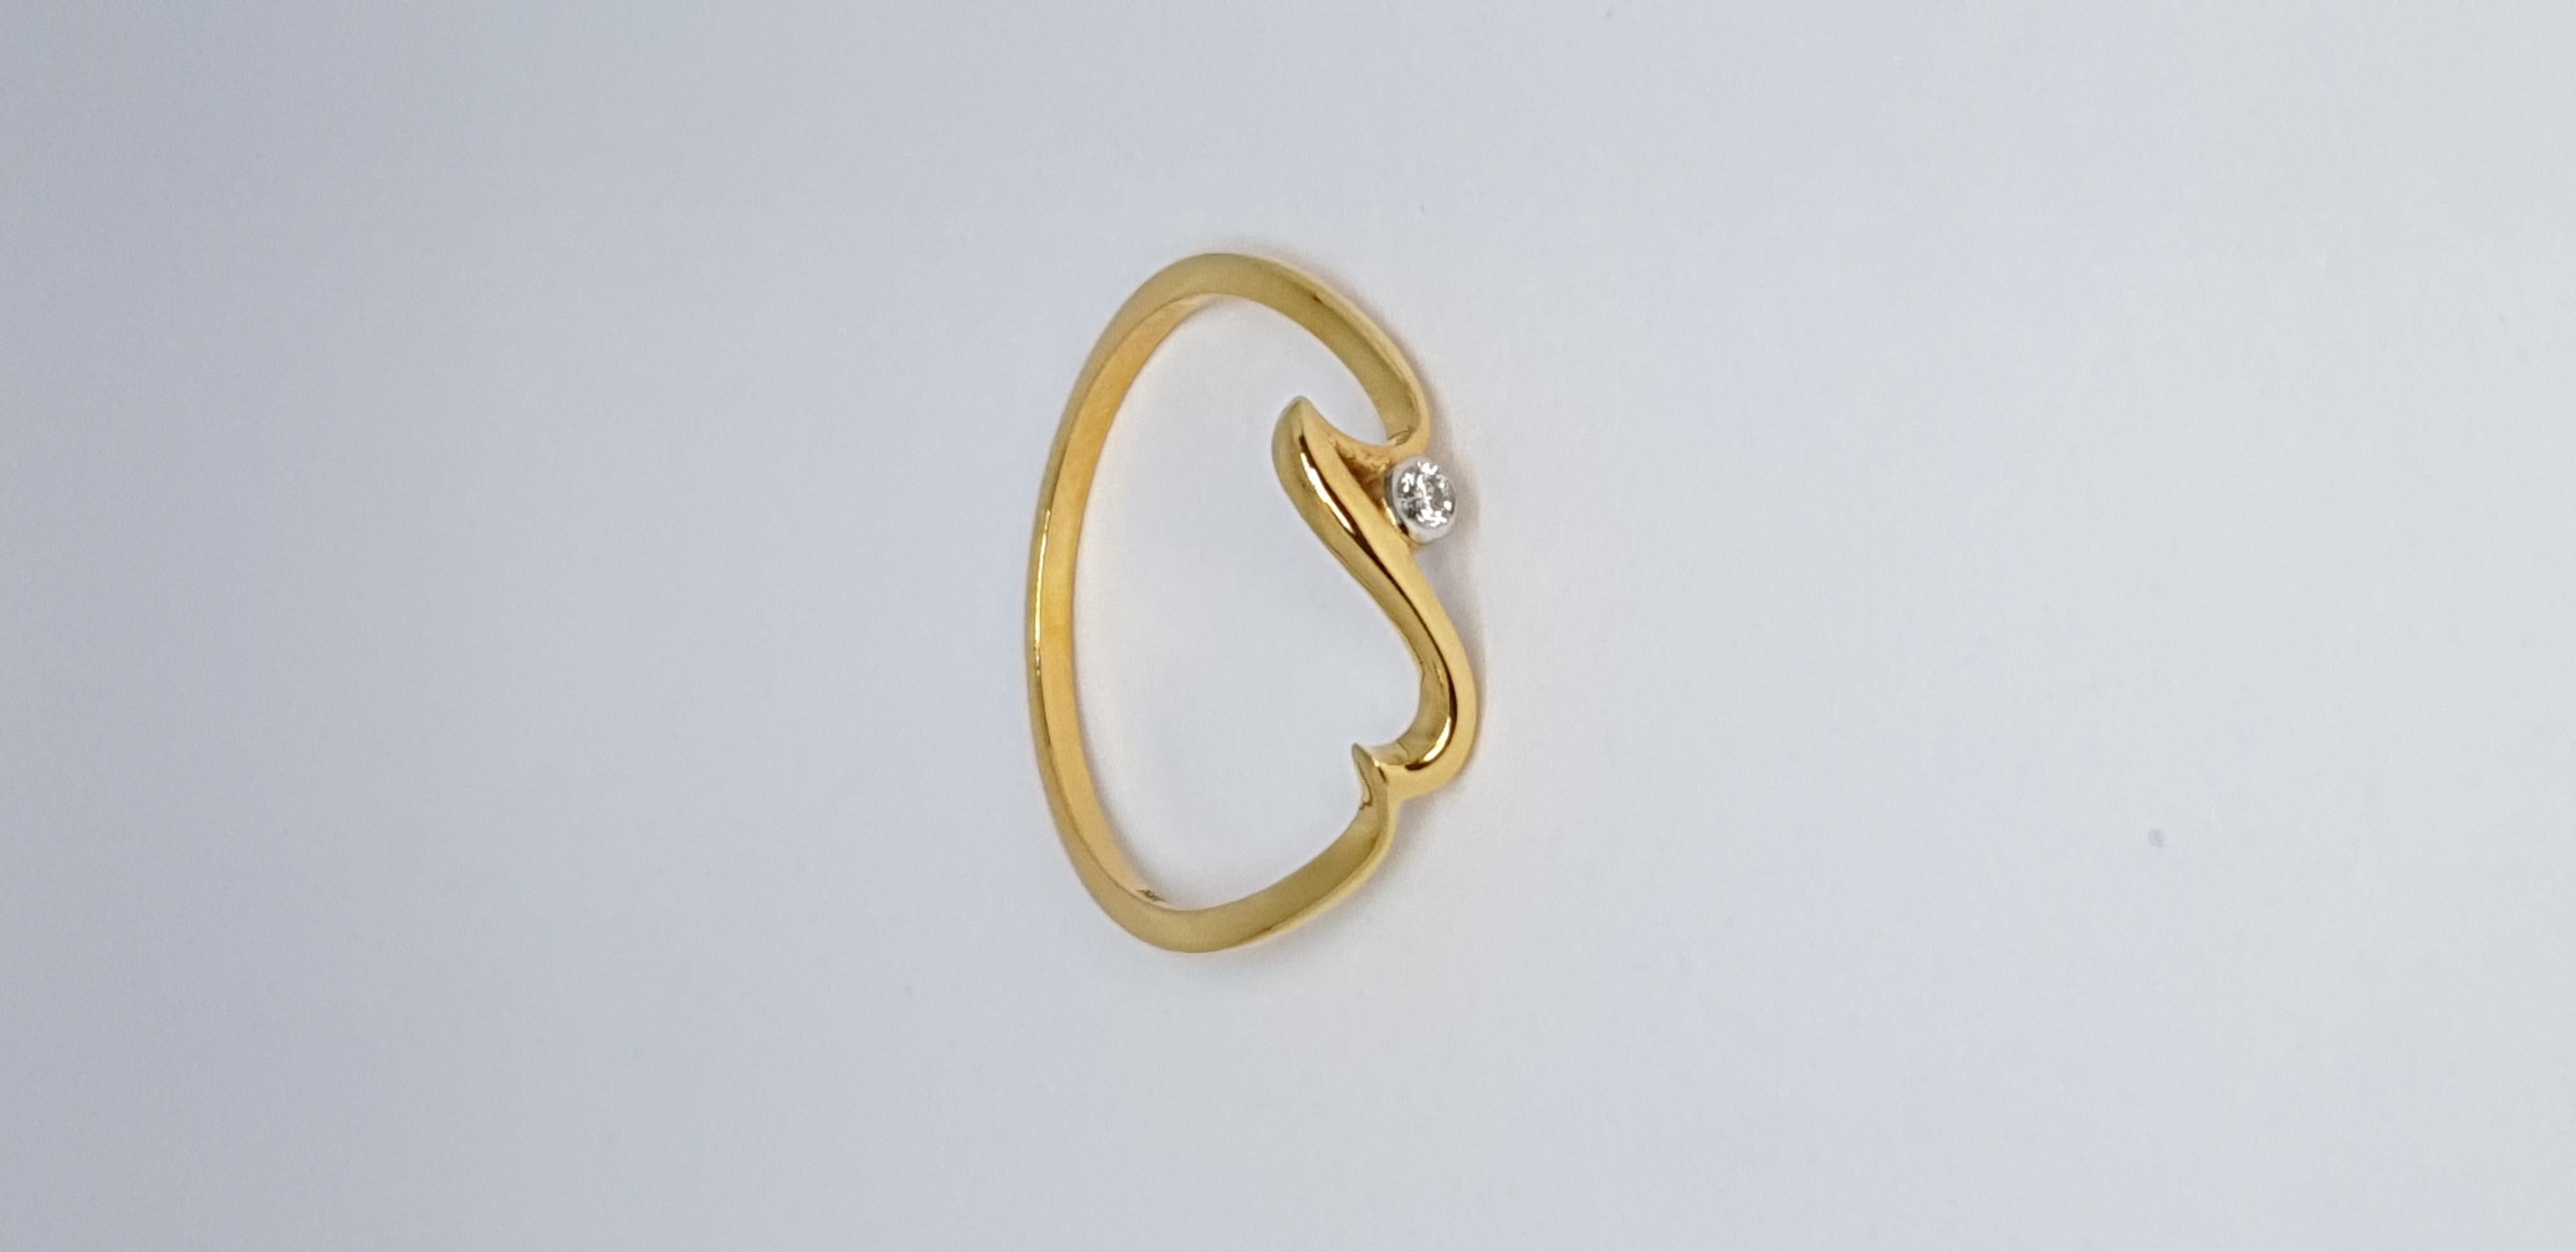 For Sale:  Natural Diamond Wave Ring 14K Solid Gold Dainty Ocean Lover Jewelry Gift. 16